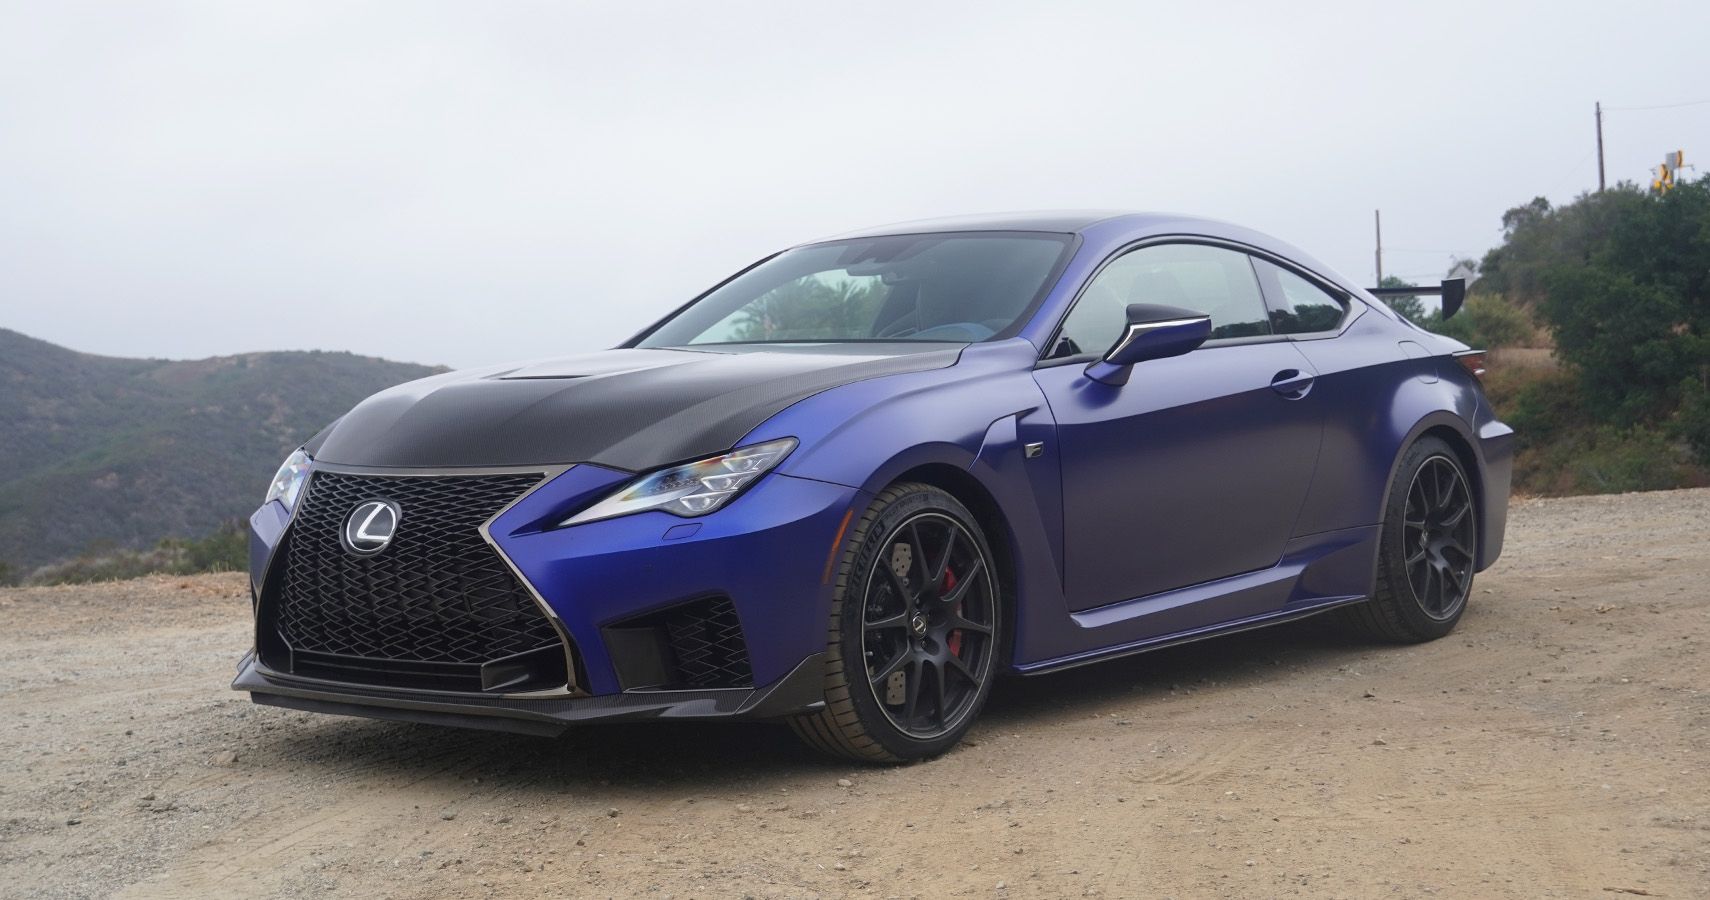 2022 Lexus Rc F Fuji Speedway Edition Review This Carbon Fiber Track Toy Costs A Pretty Penny